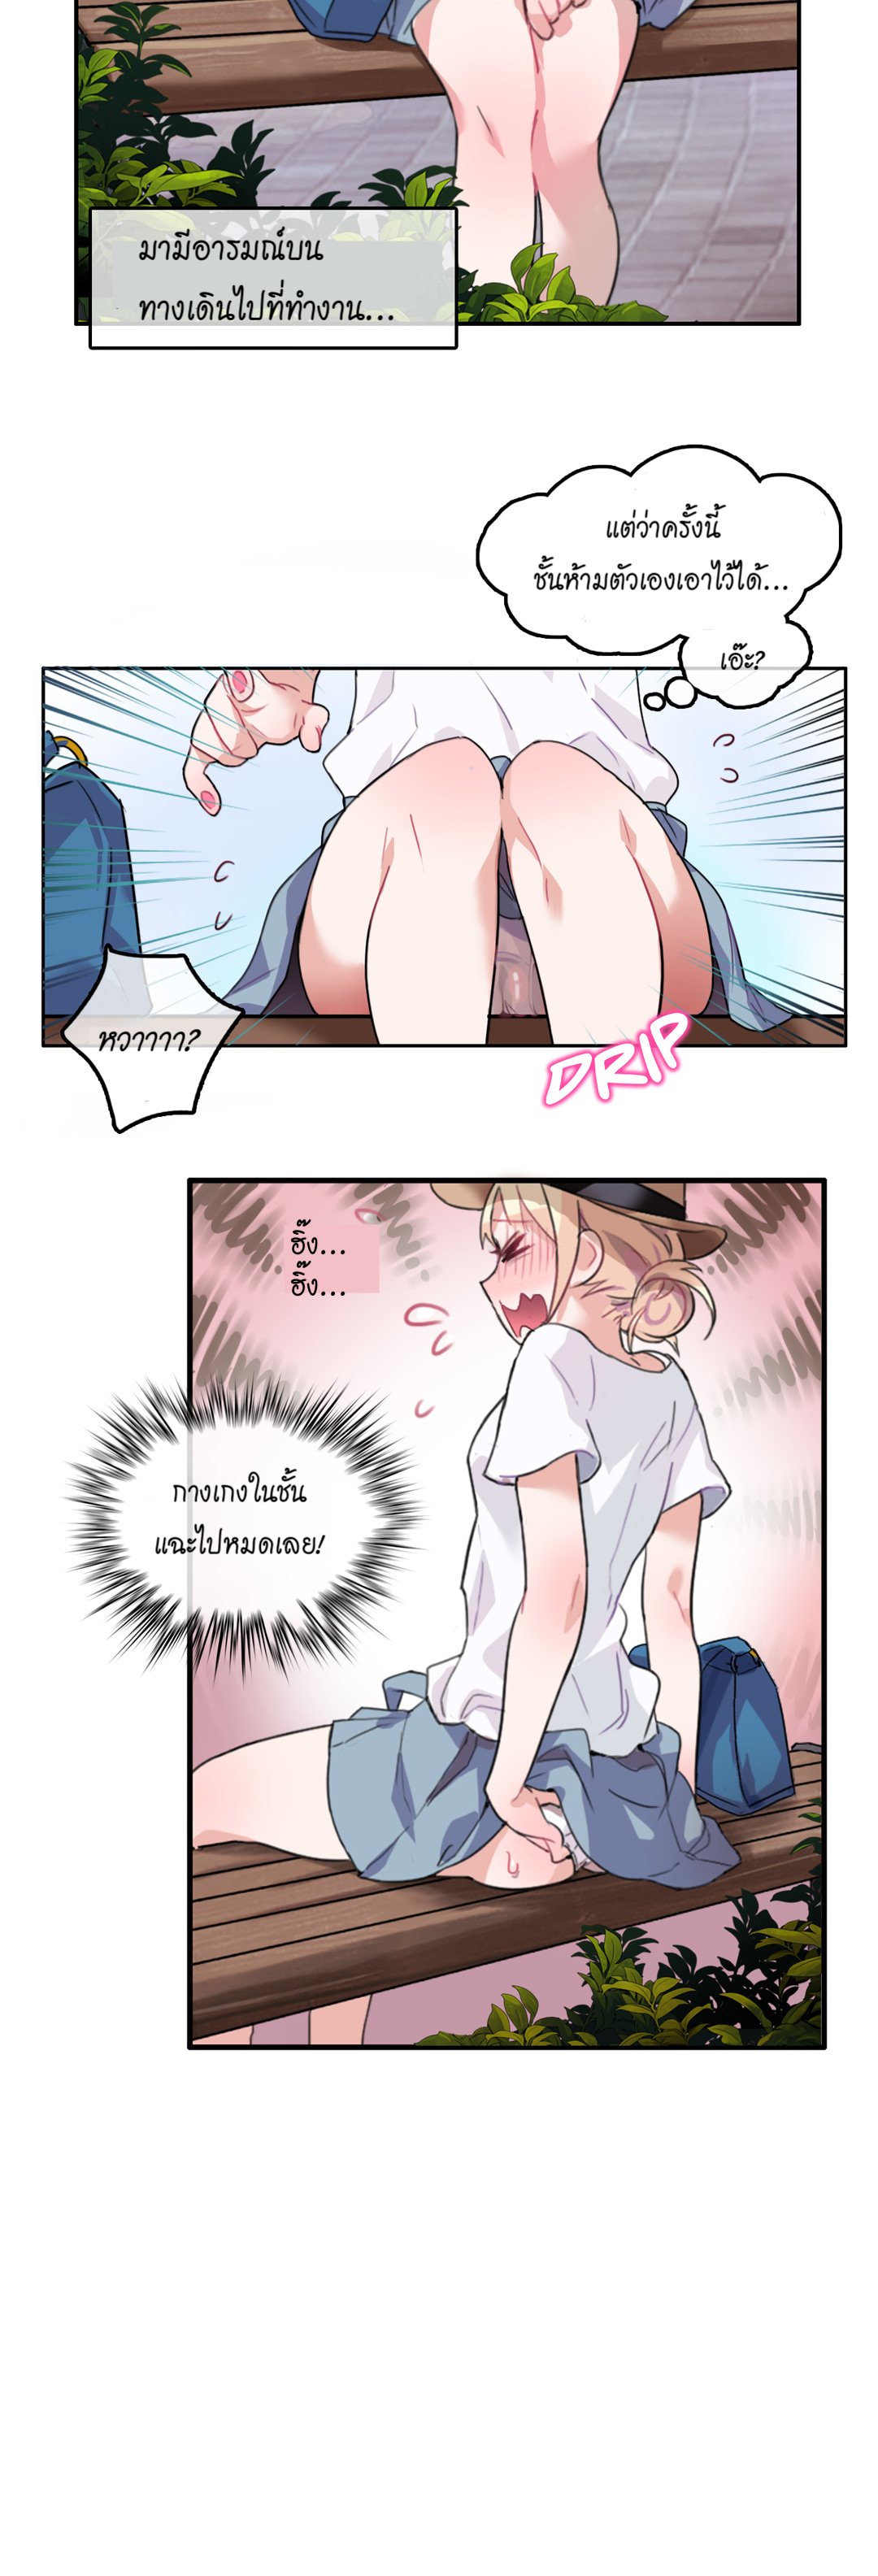 A Pervert’s Daily Life 2 (6)